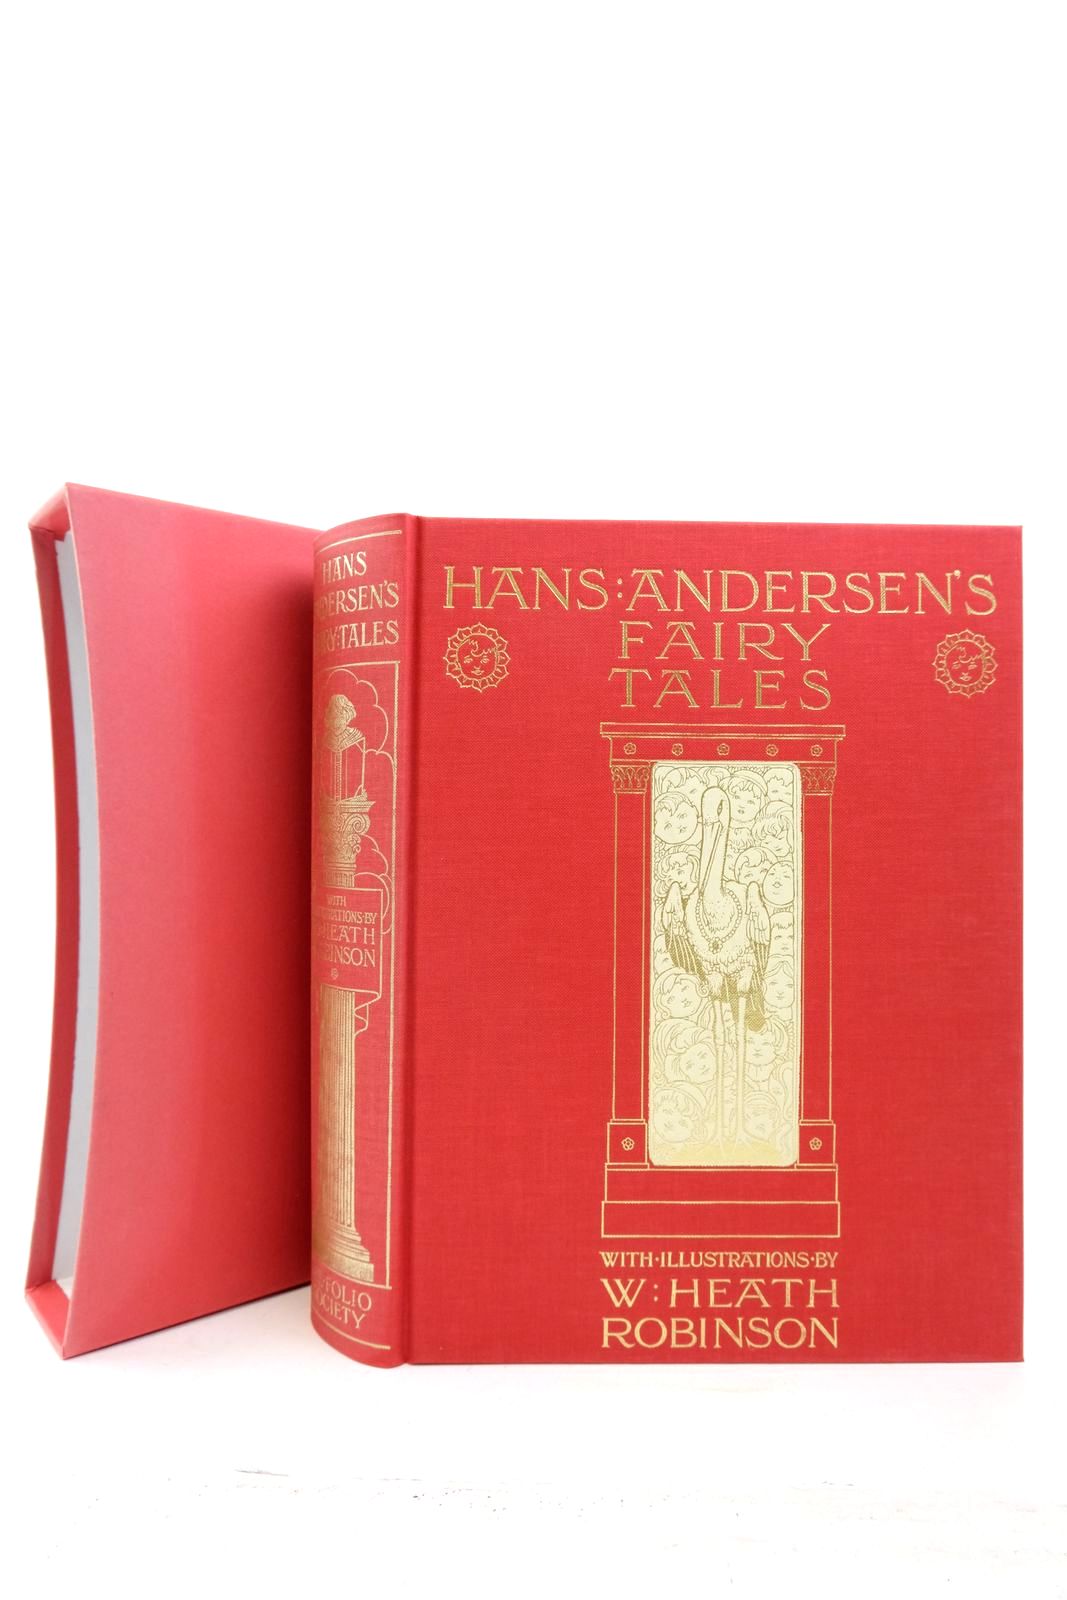 Photo of HANS ANDERSEN'S FAIRY TALES written by Andersen, Hans Christian illustrated by Robinson, W. Heath published by Folio Society (STOCK CODE: 2140767)  for sale by Stella & Rose's Books